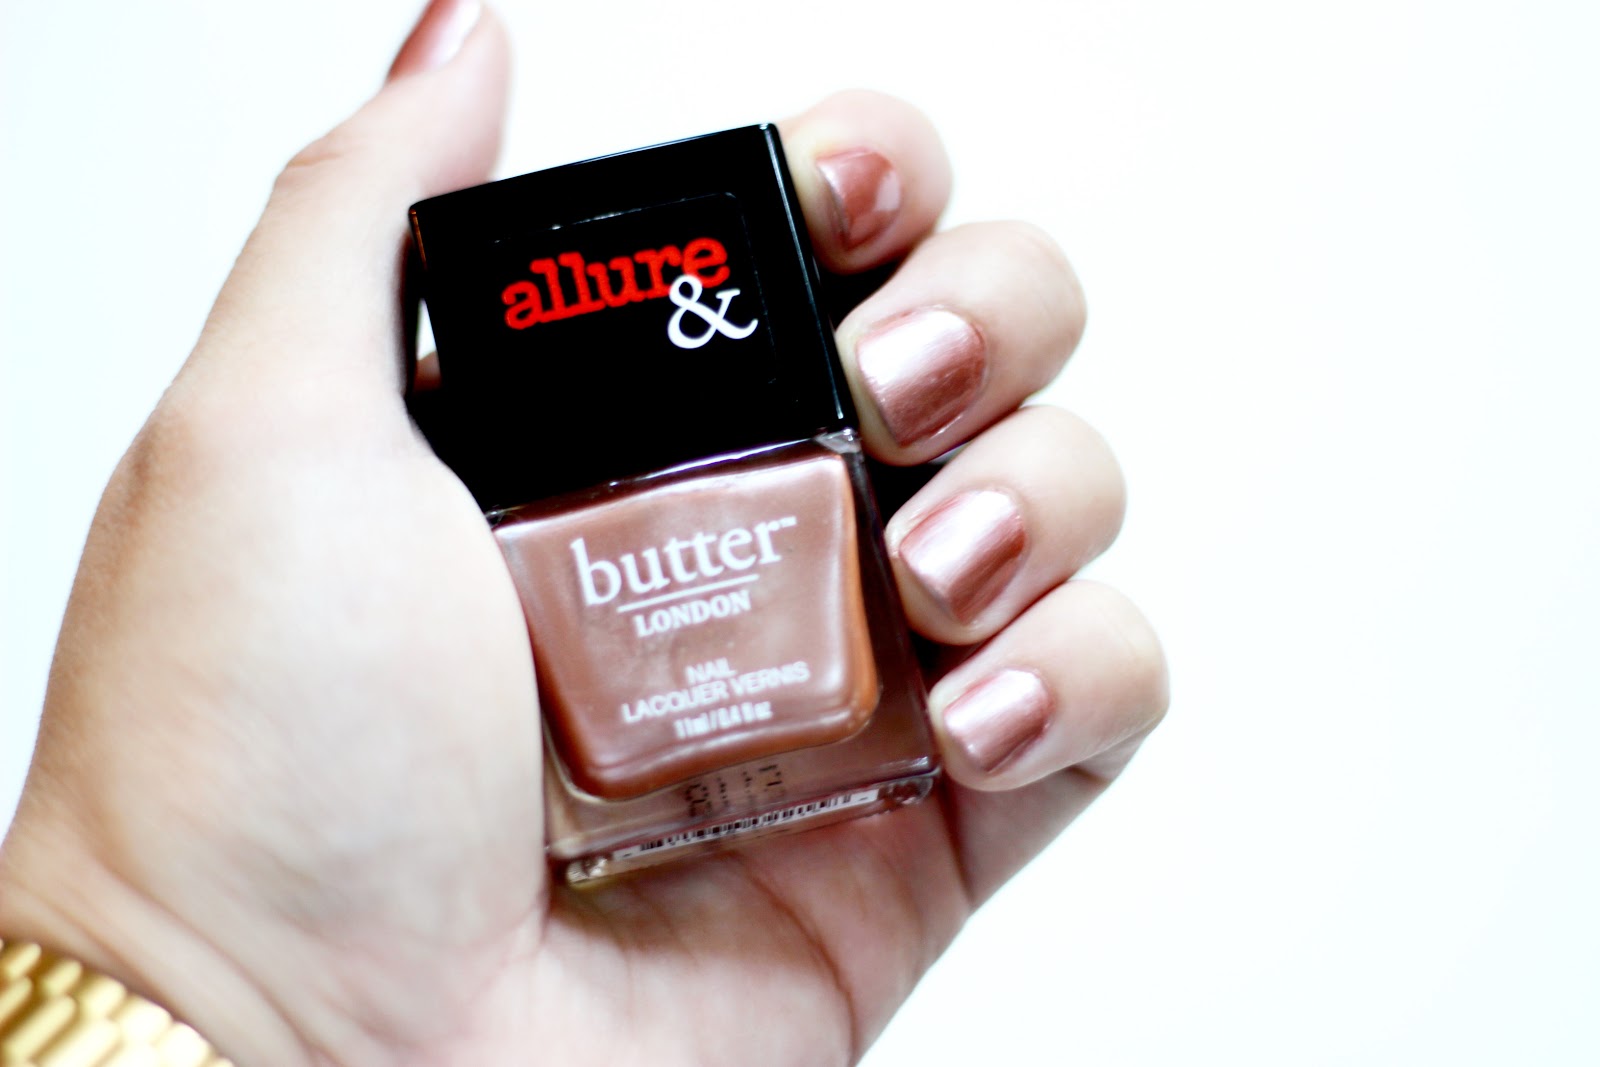 Butter London Nail Lacquer in Teddy Girl - wide 7